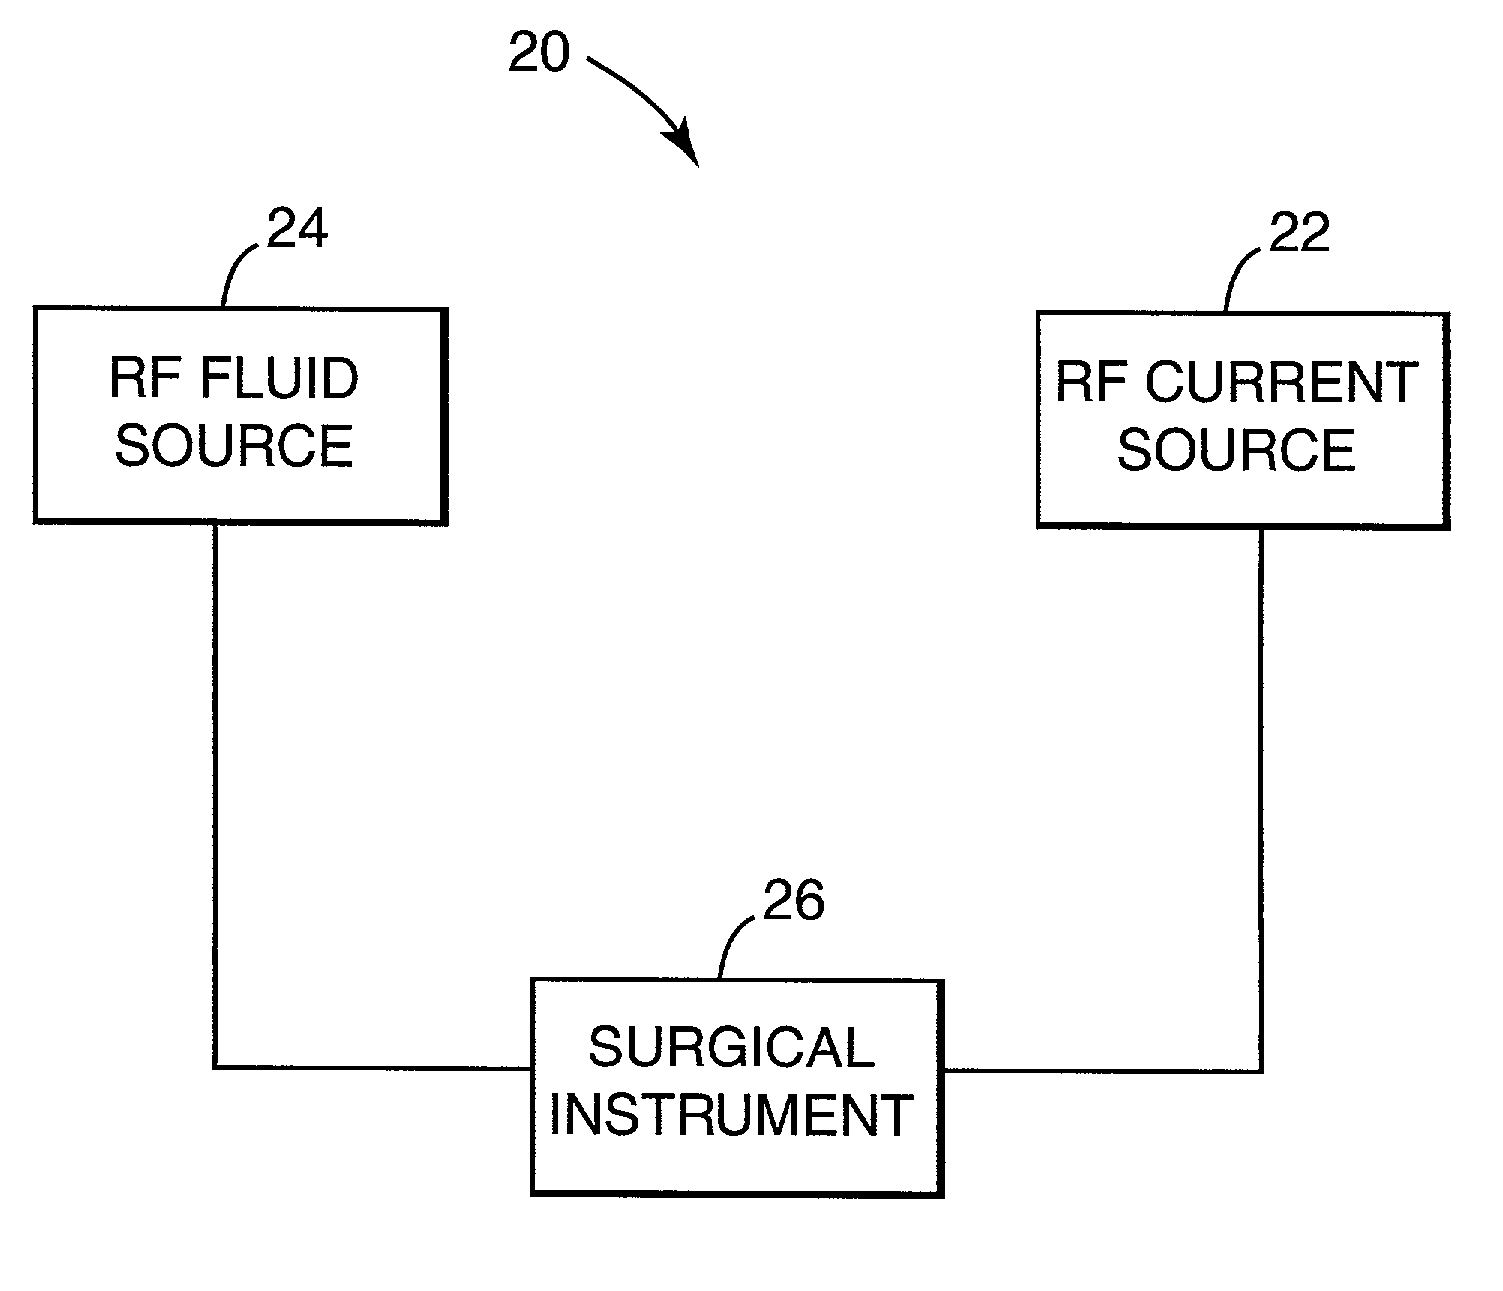 Helical needle apparatus for creating a virtual electrode used for the ablation of tissue